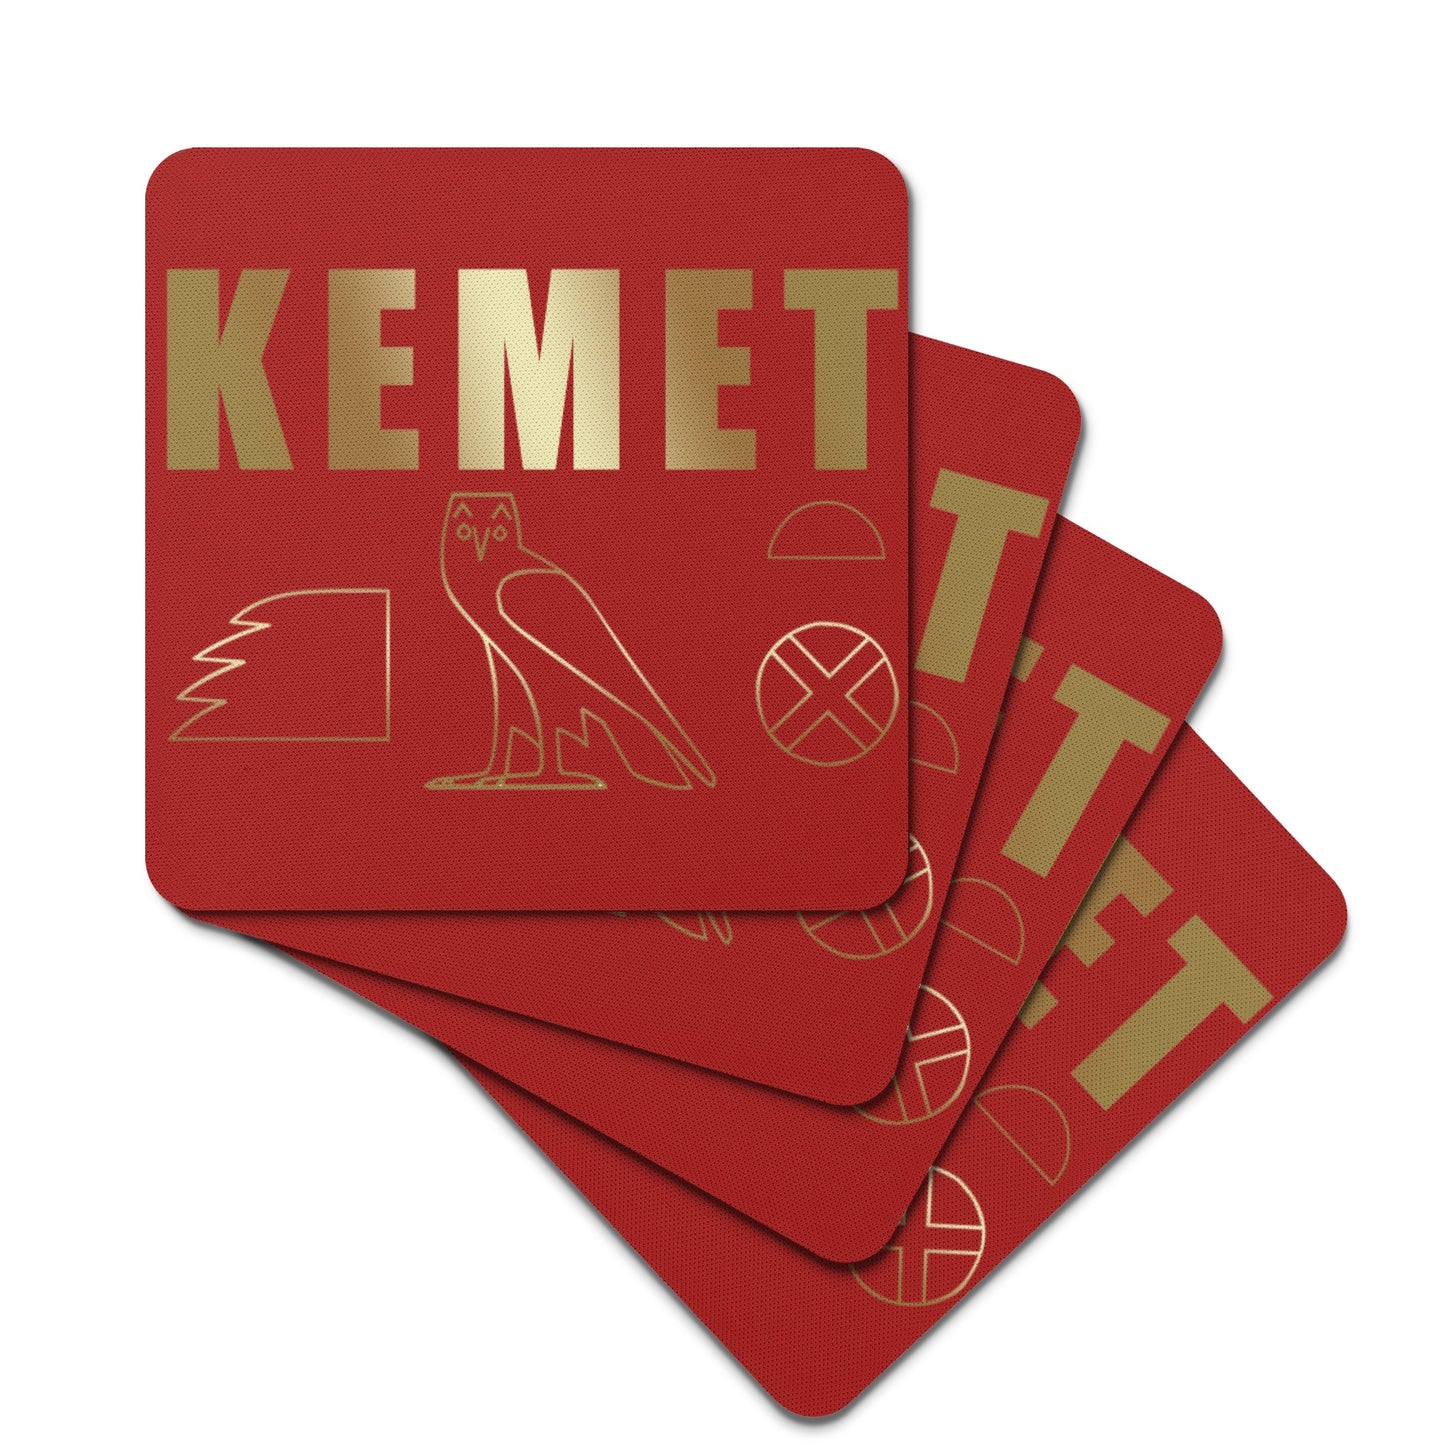 MAAT FOREVER Rubber Coasters Sets